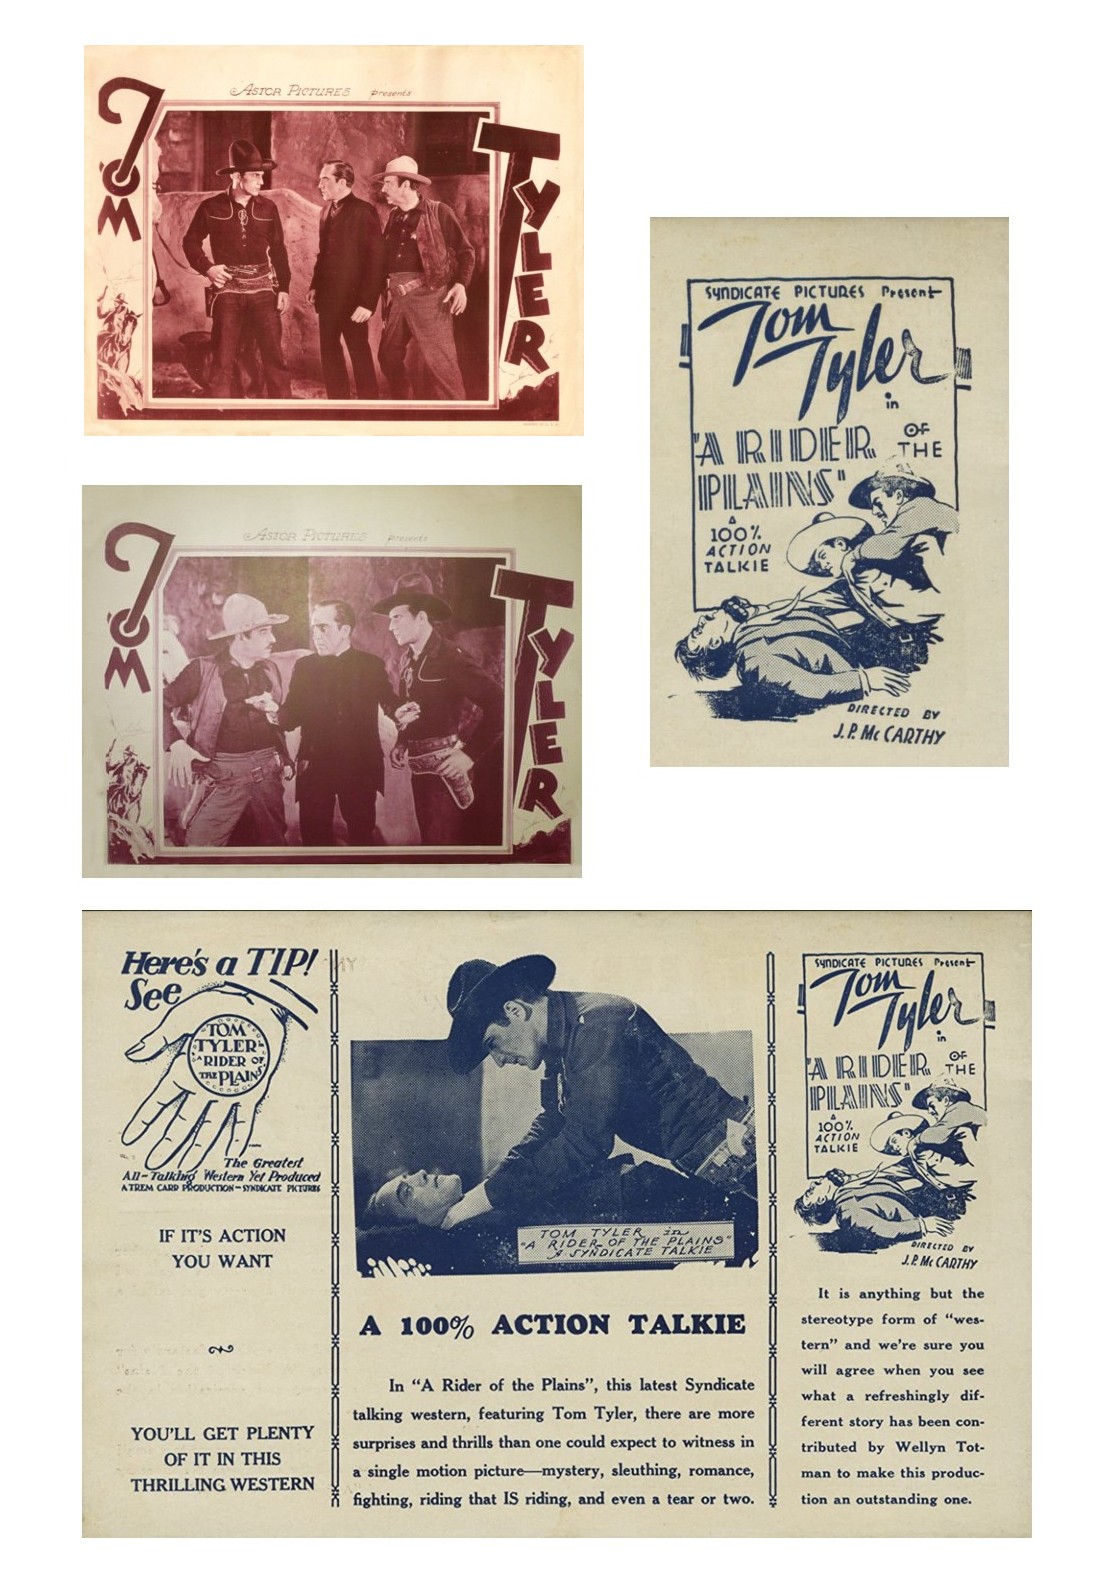 A Rider of the Plains lobby card movie herald